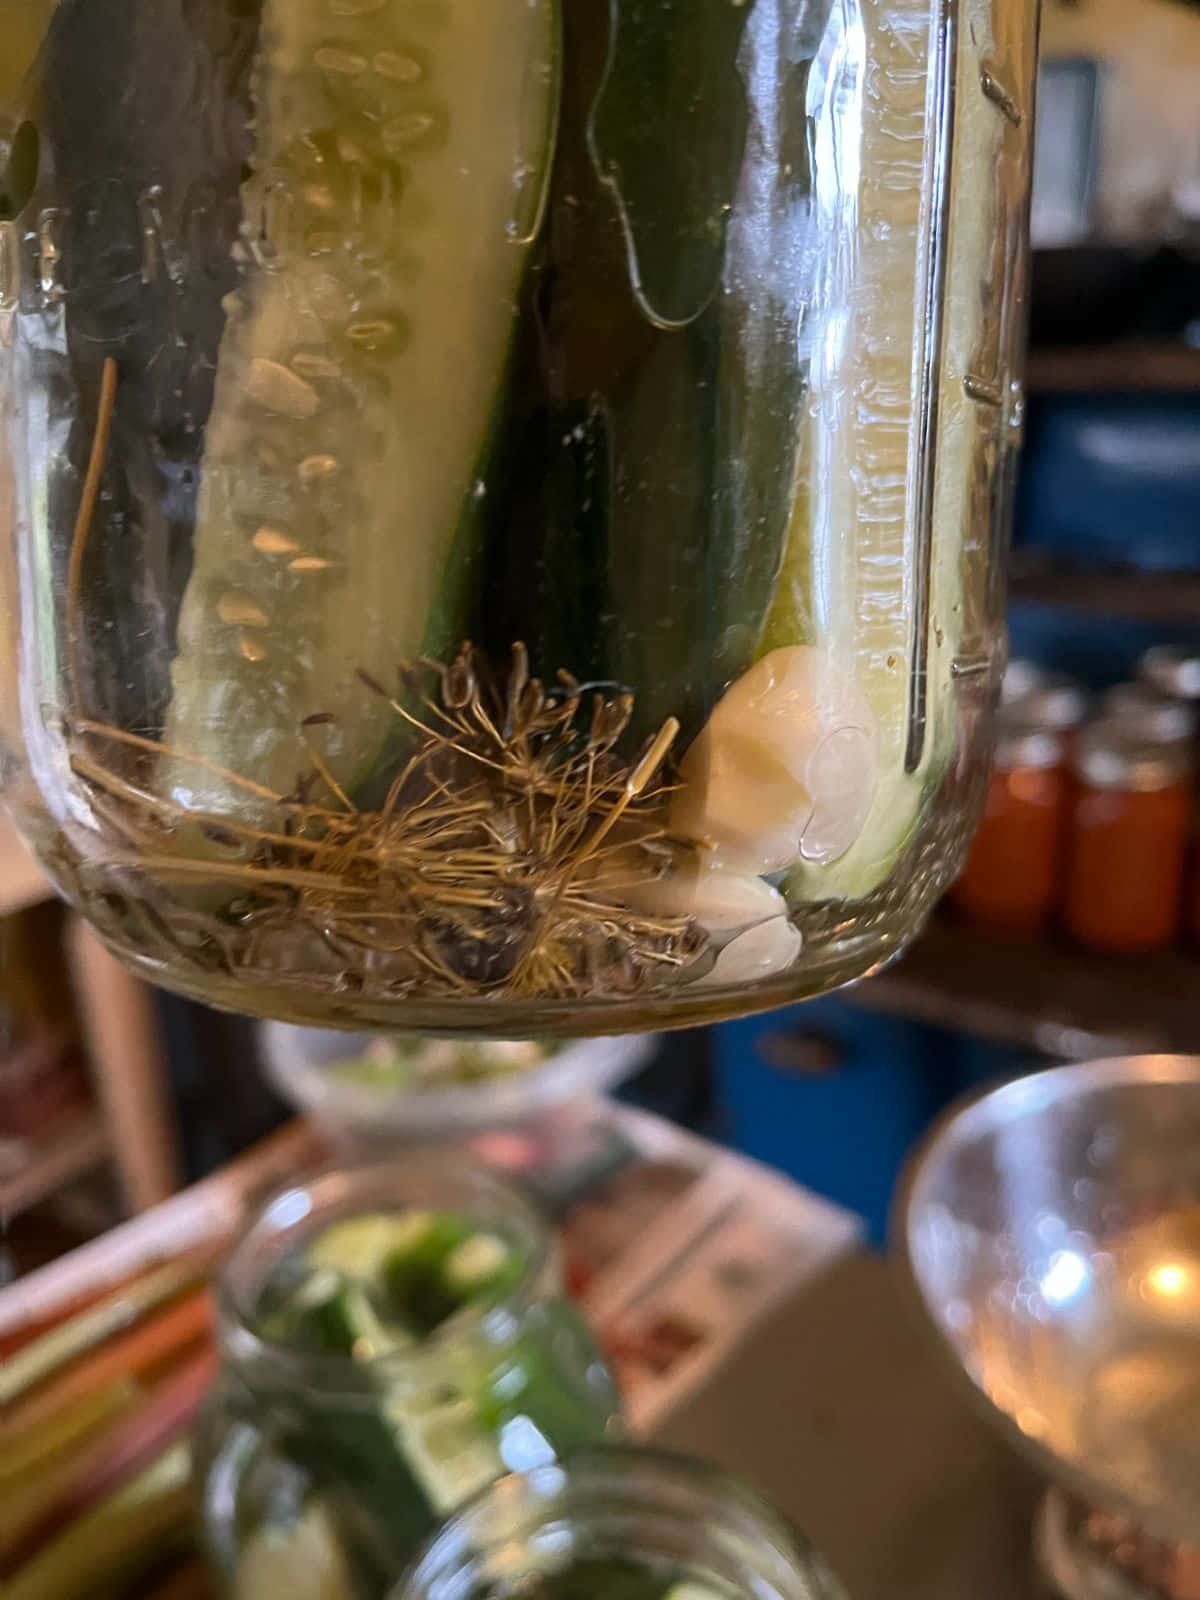 The bottom of a jar of dill pickles with fresh dill and garlic cloves